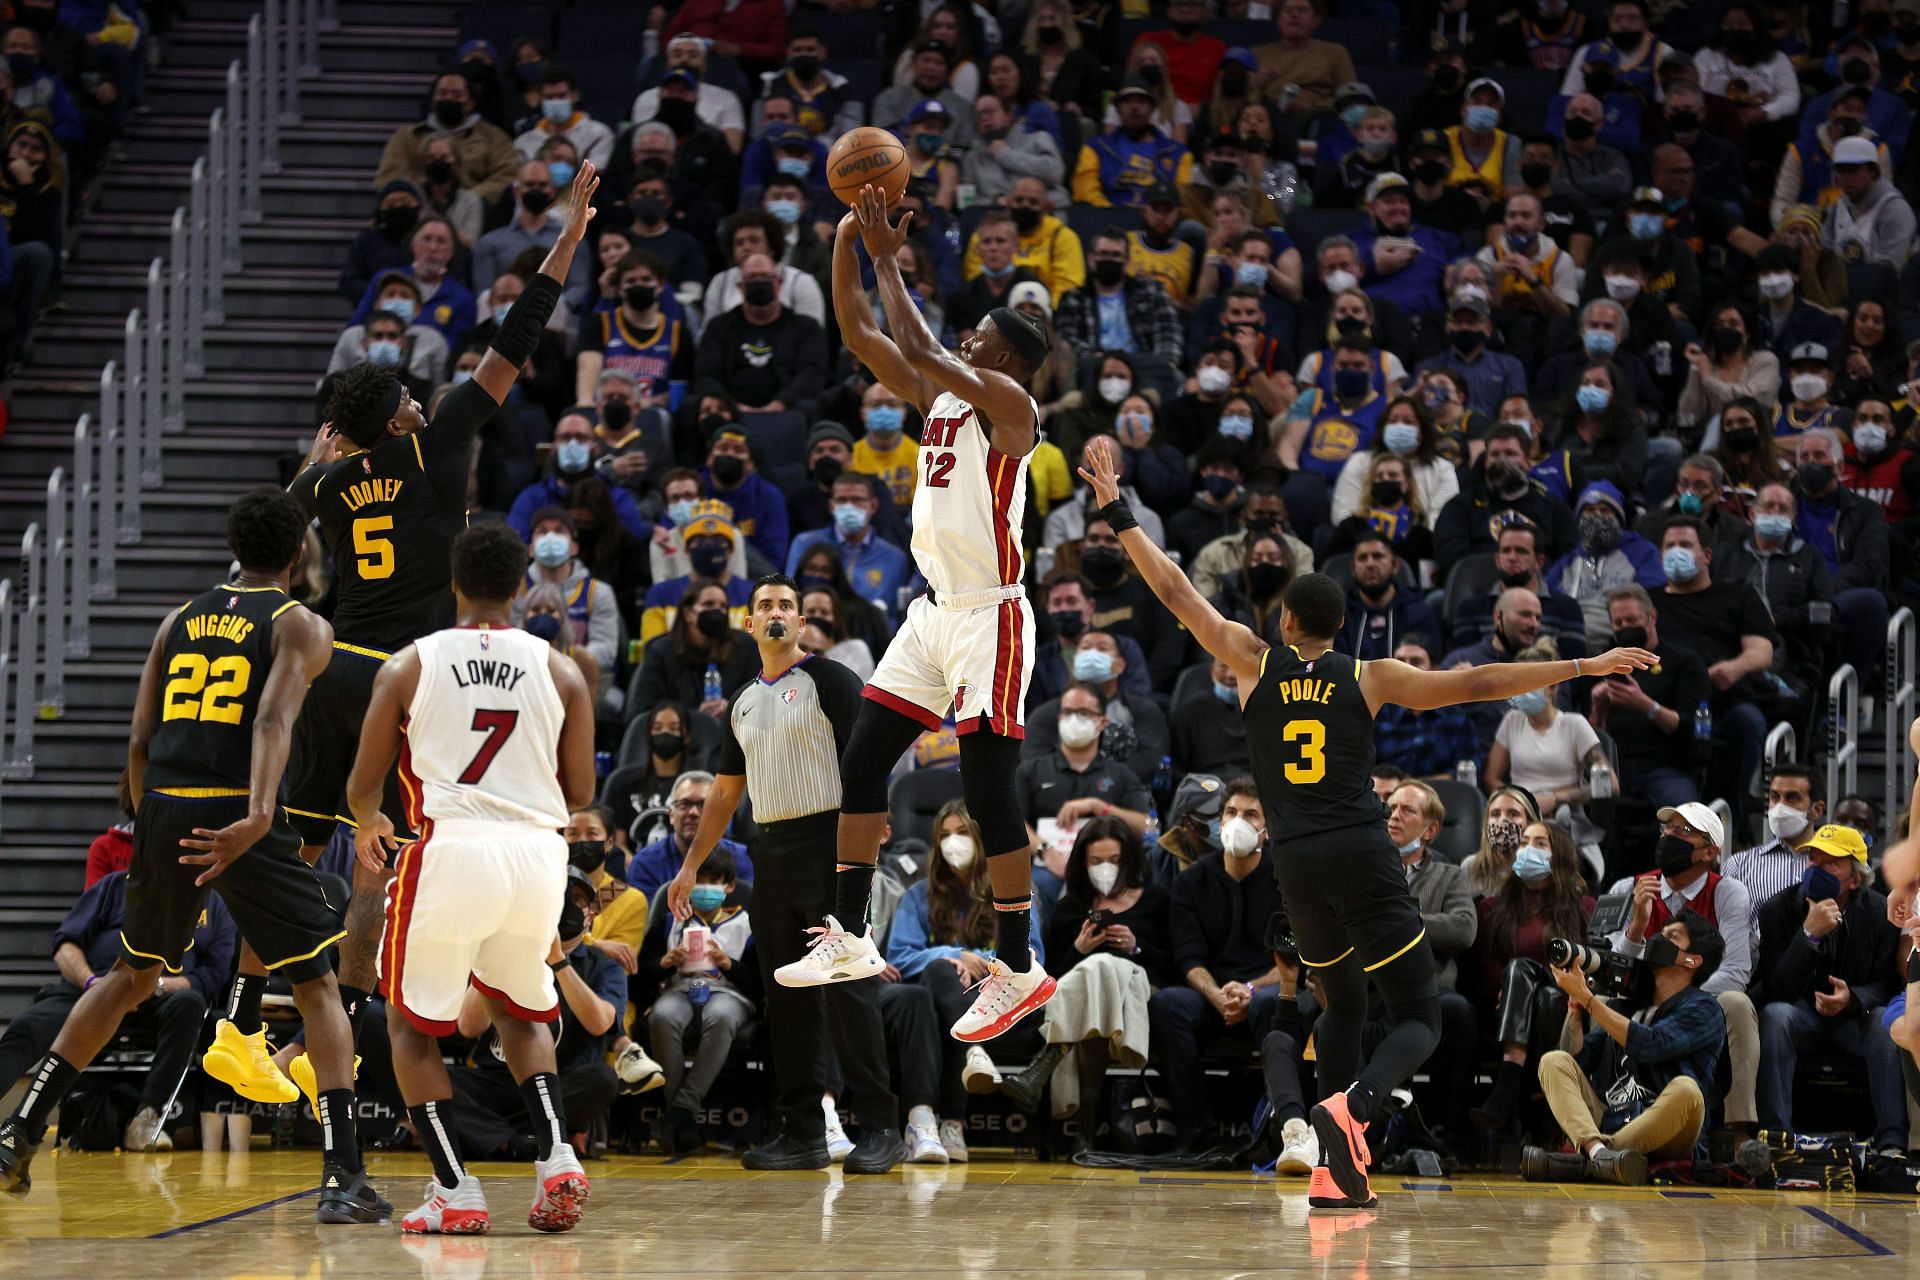 Jimmy Butler attempts a jump shot in the Miami Heat vs Golden State Warriors game